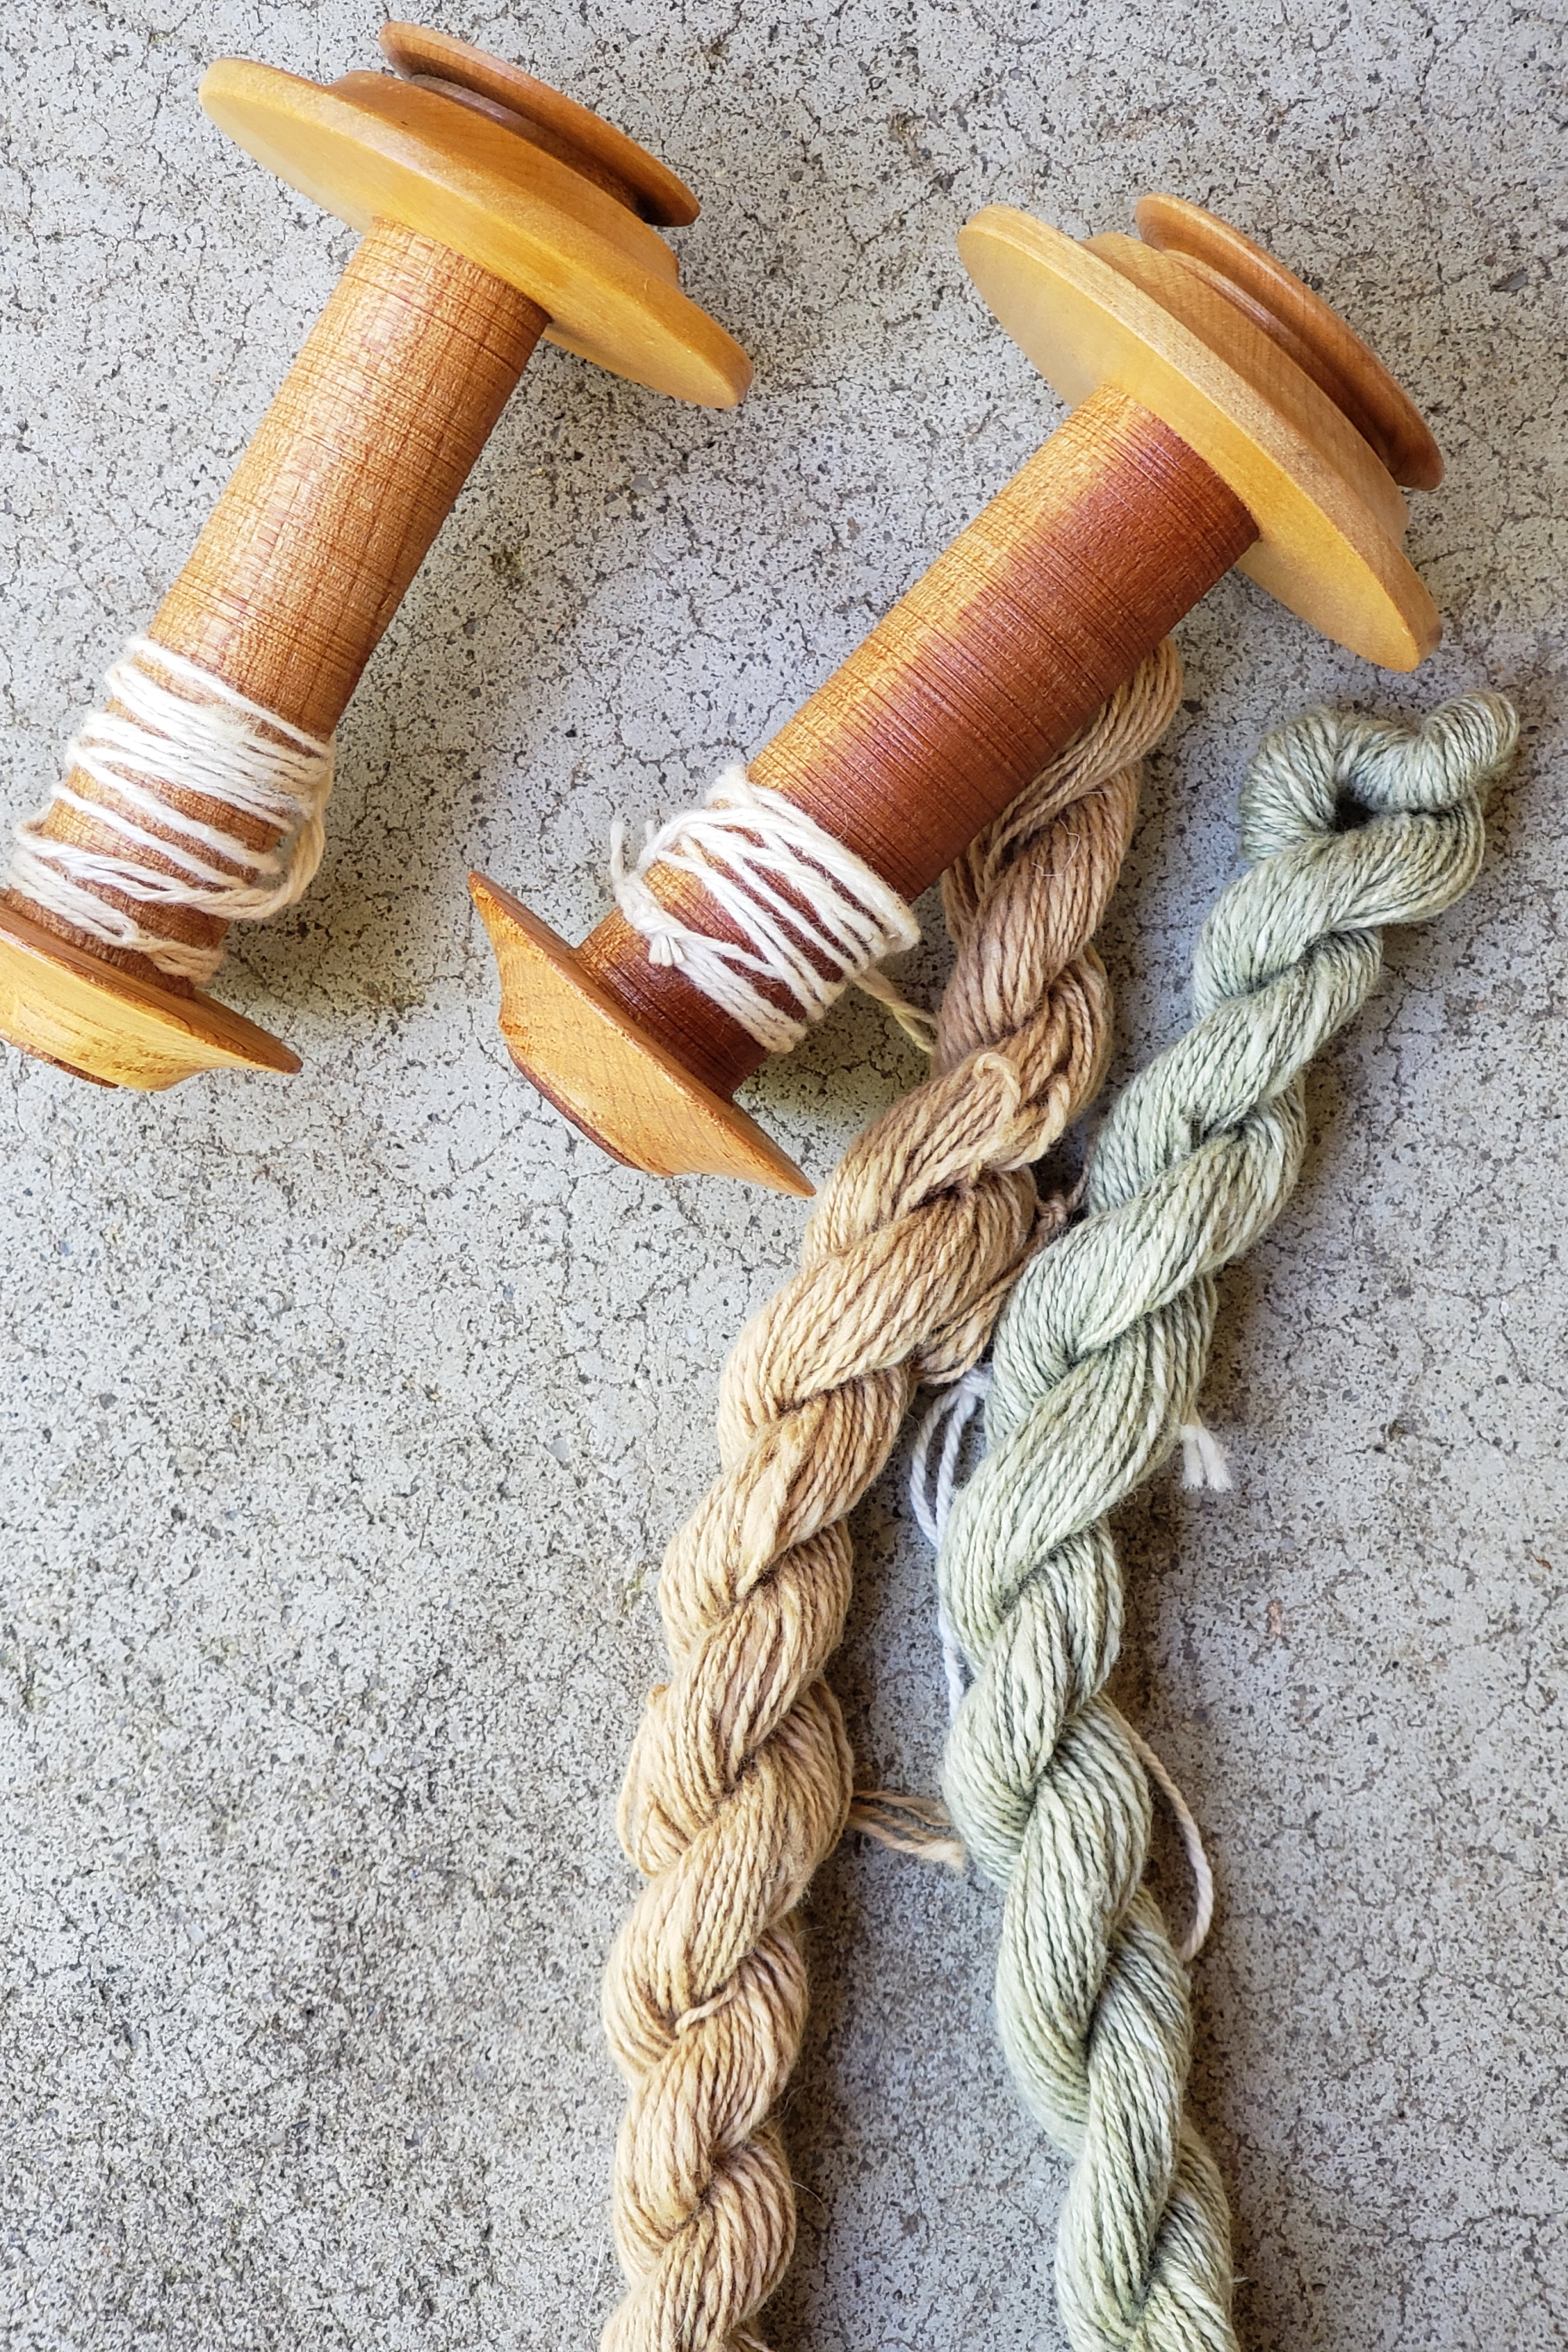 Two mini skeins of handspun naturally colored cotton rest on a concrete background next to two wooden bobbins.